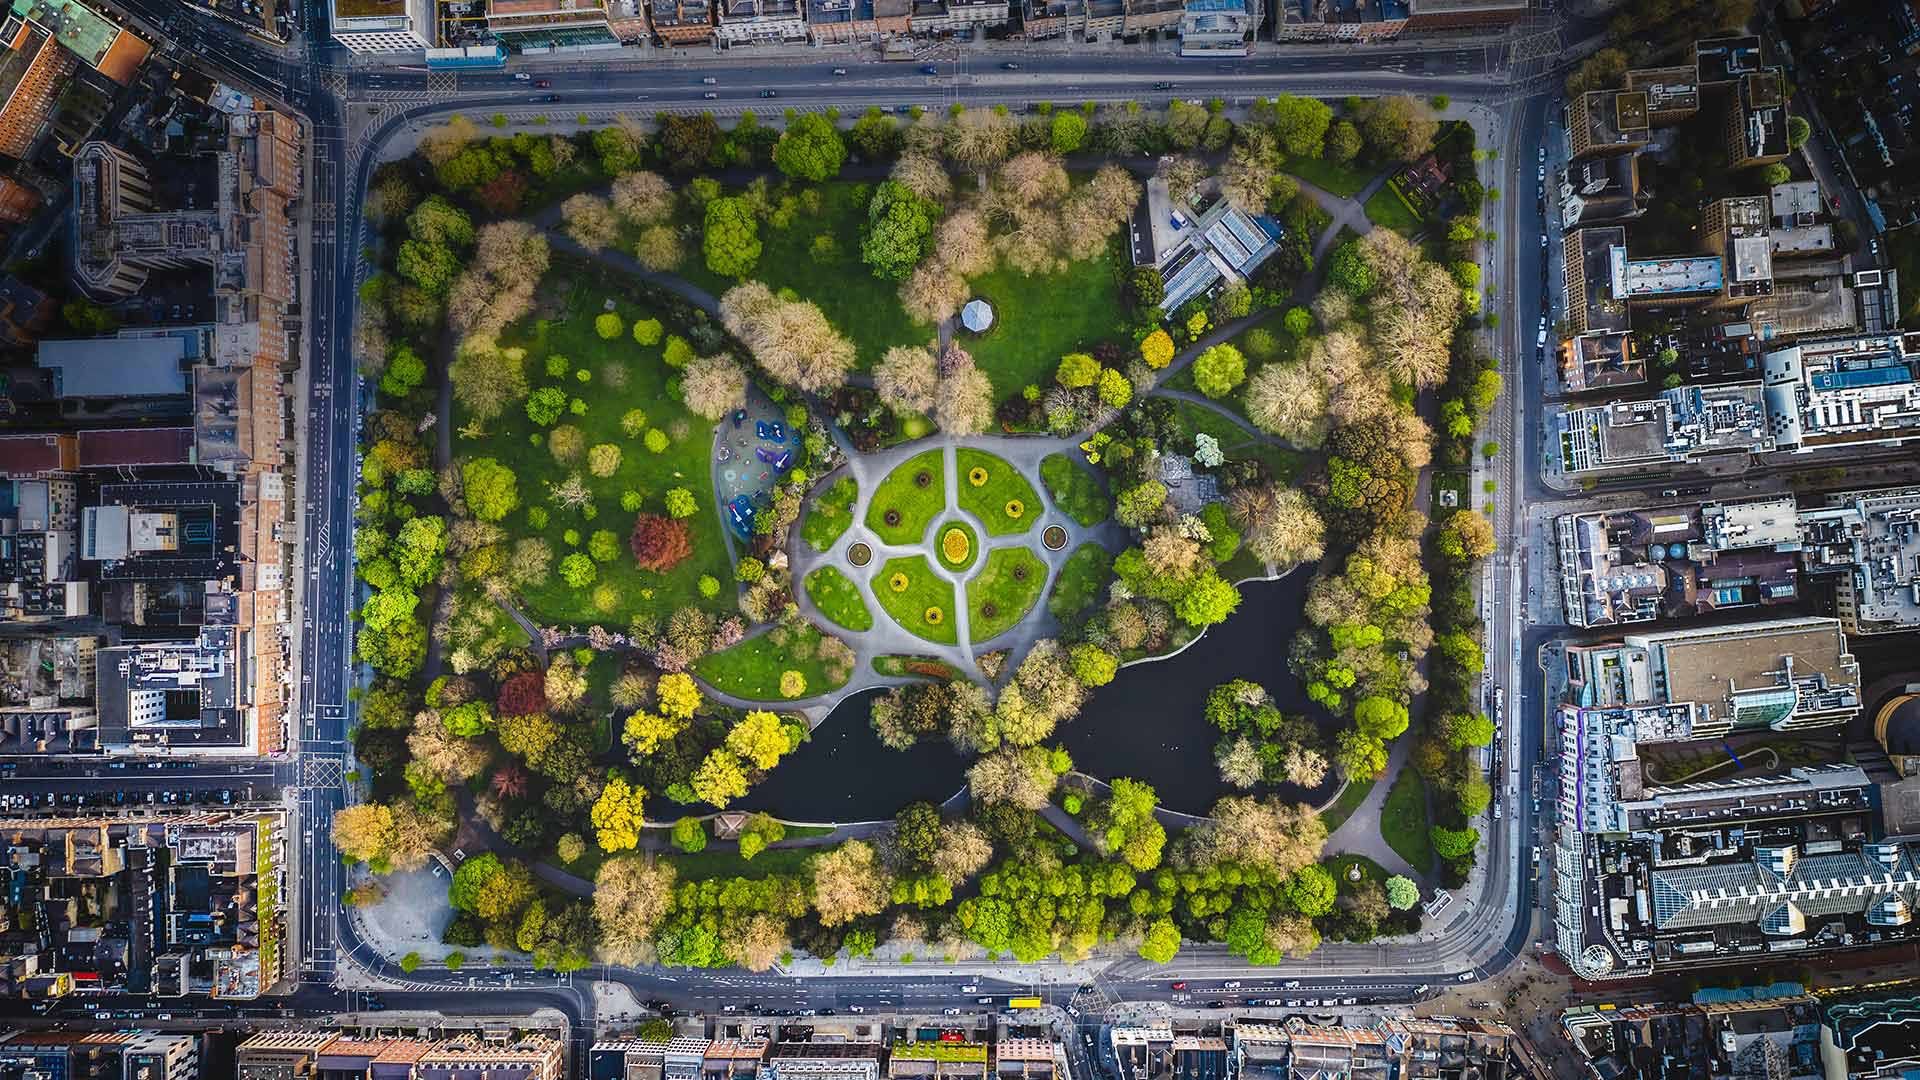 St.-Stephens-Green Top 10 Unforgettable Tourist Attractions to Discover in Ireland